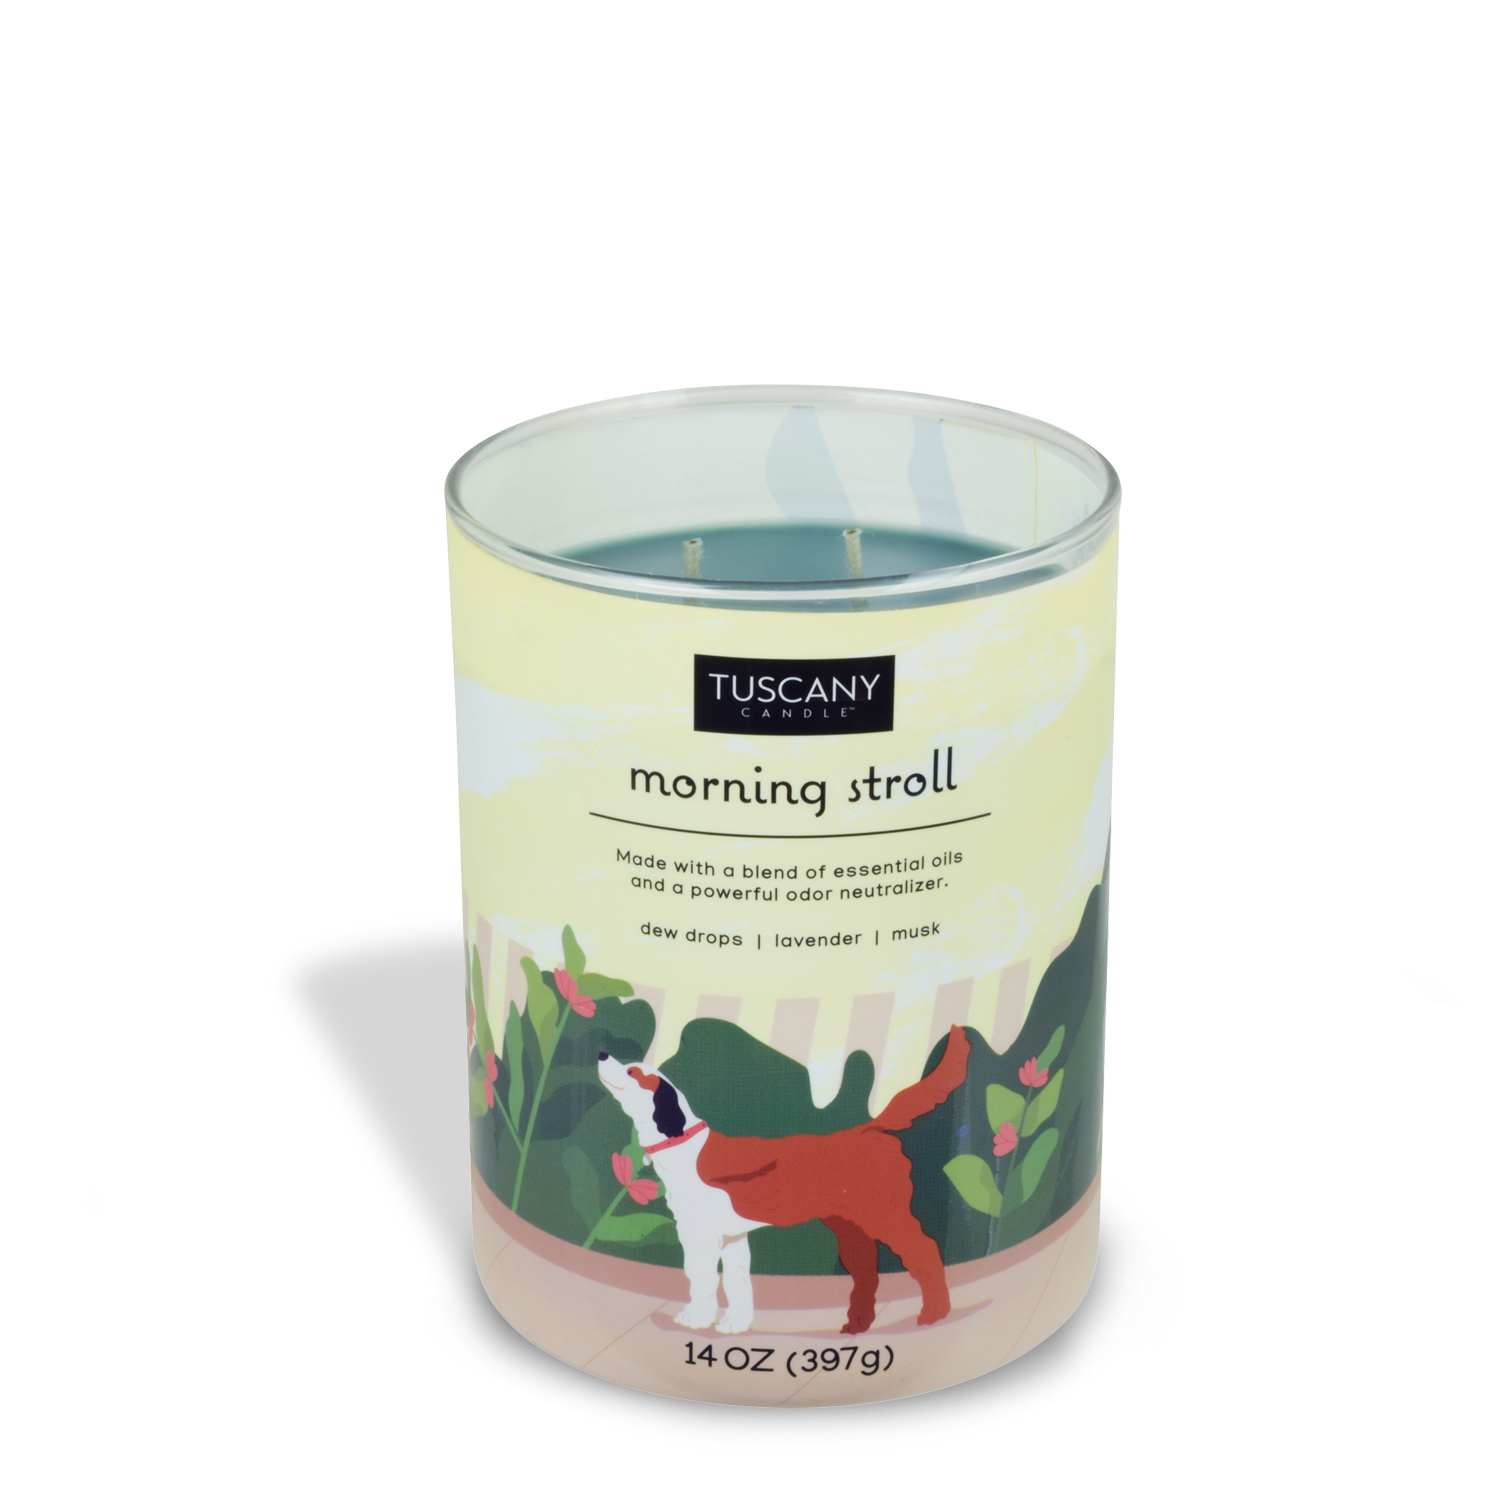 A Morning Stroll scented candle from Tuscany Candle with an image of a dog on it for neutralizing pet odors.